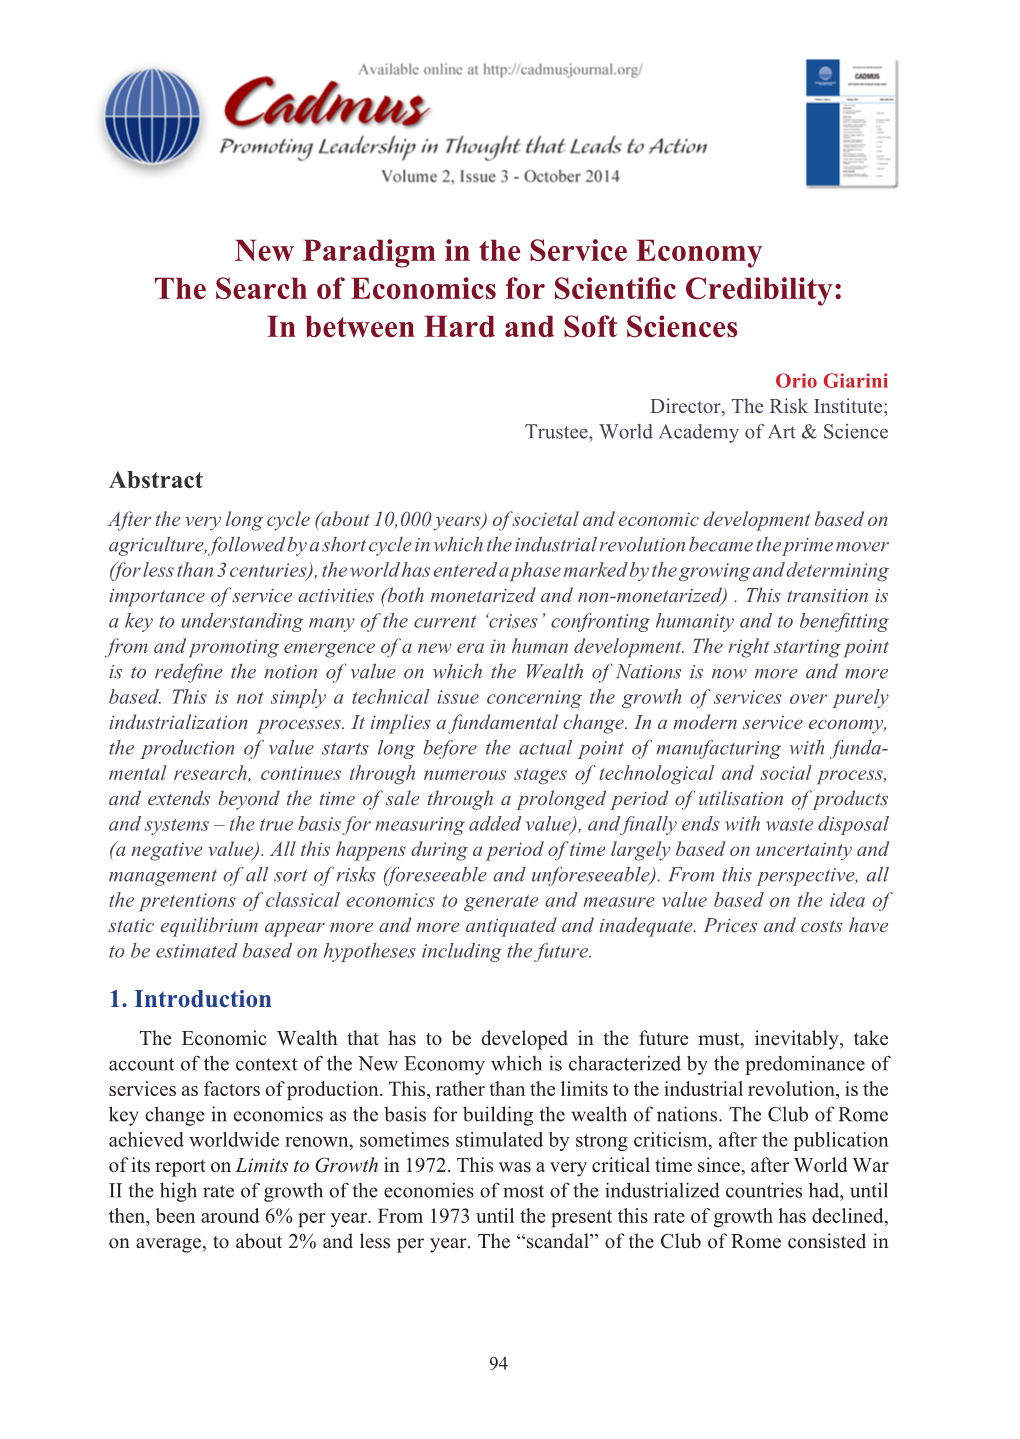 New Paradigm in the Service Economy the Search of Economics for Scientific Credibility: in Between Hard and Soft Sciences